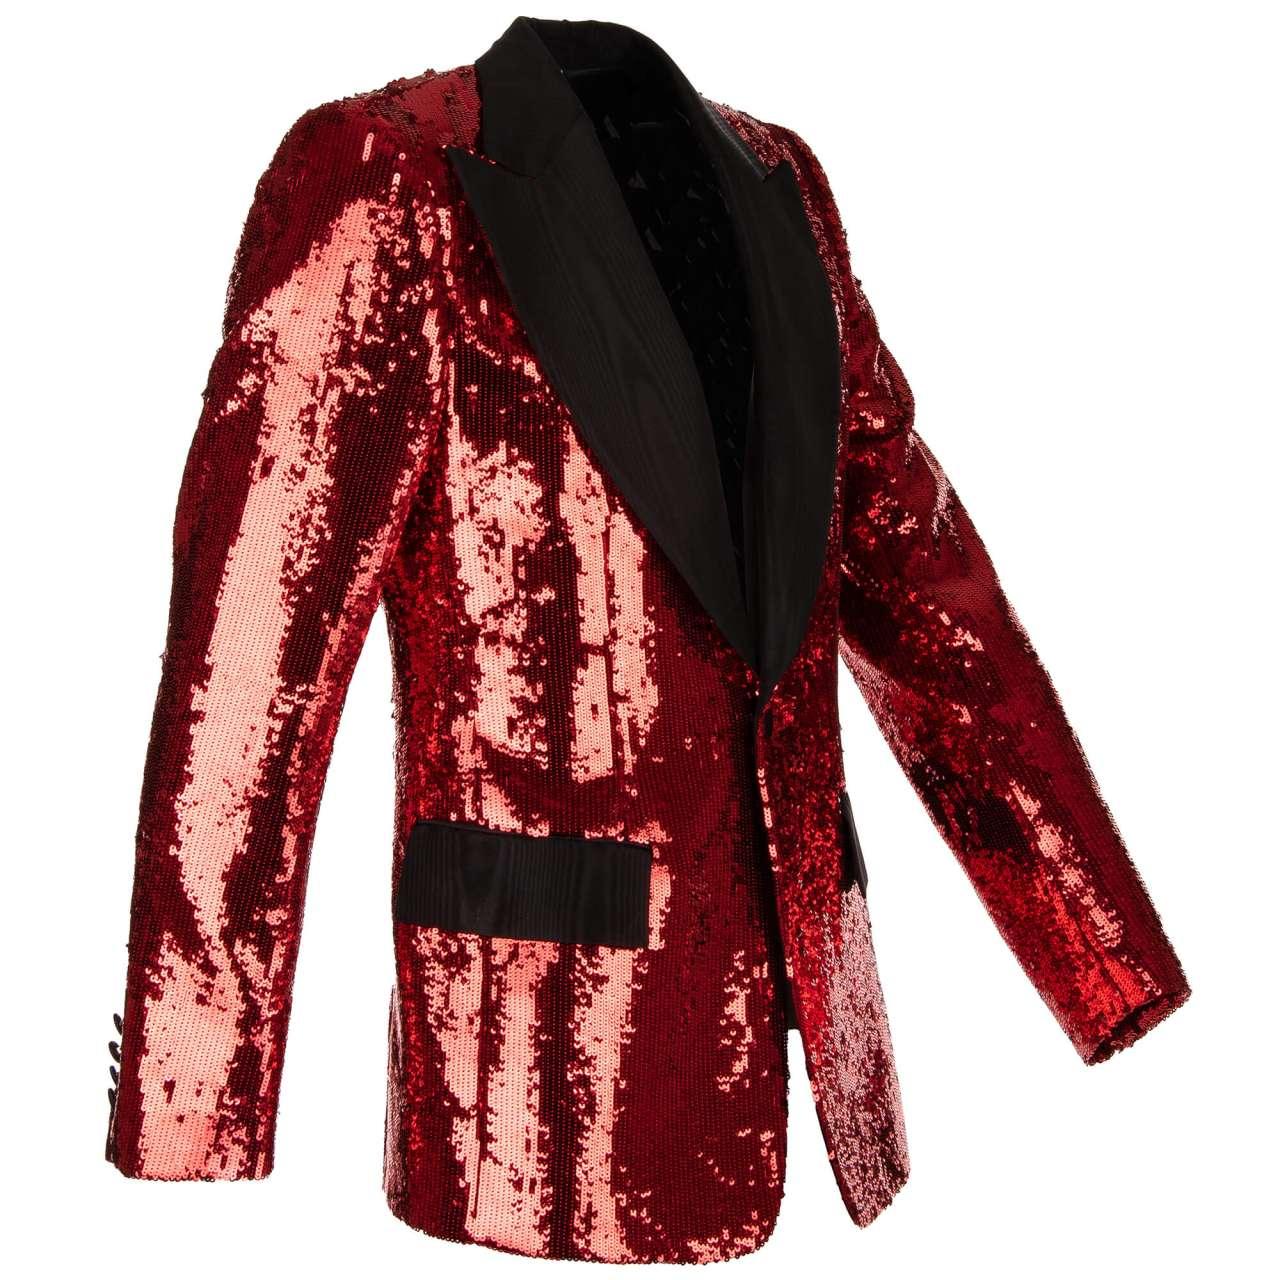 Dolce & Gabbana - Sequined Tuxedo Blazer with Moire Lapel Red Black 58 In Excellent Condition For Sale In Erkrath, DE